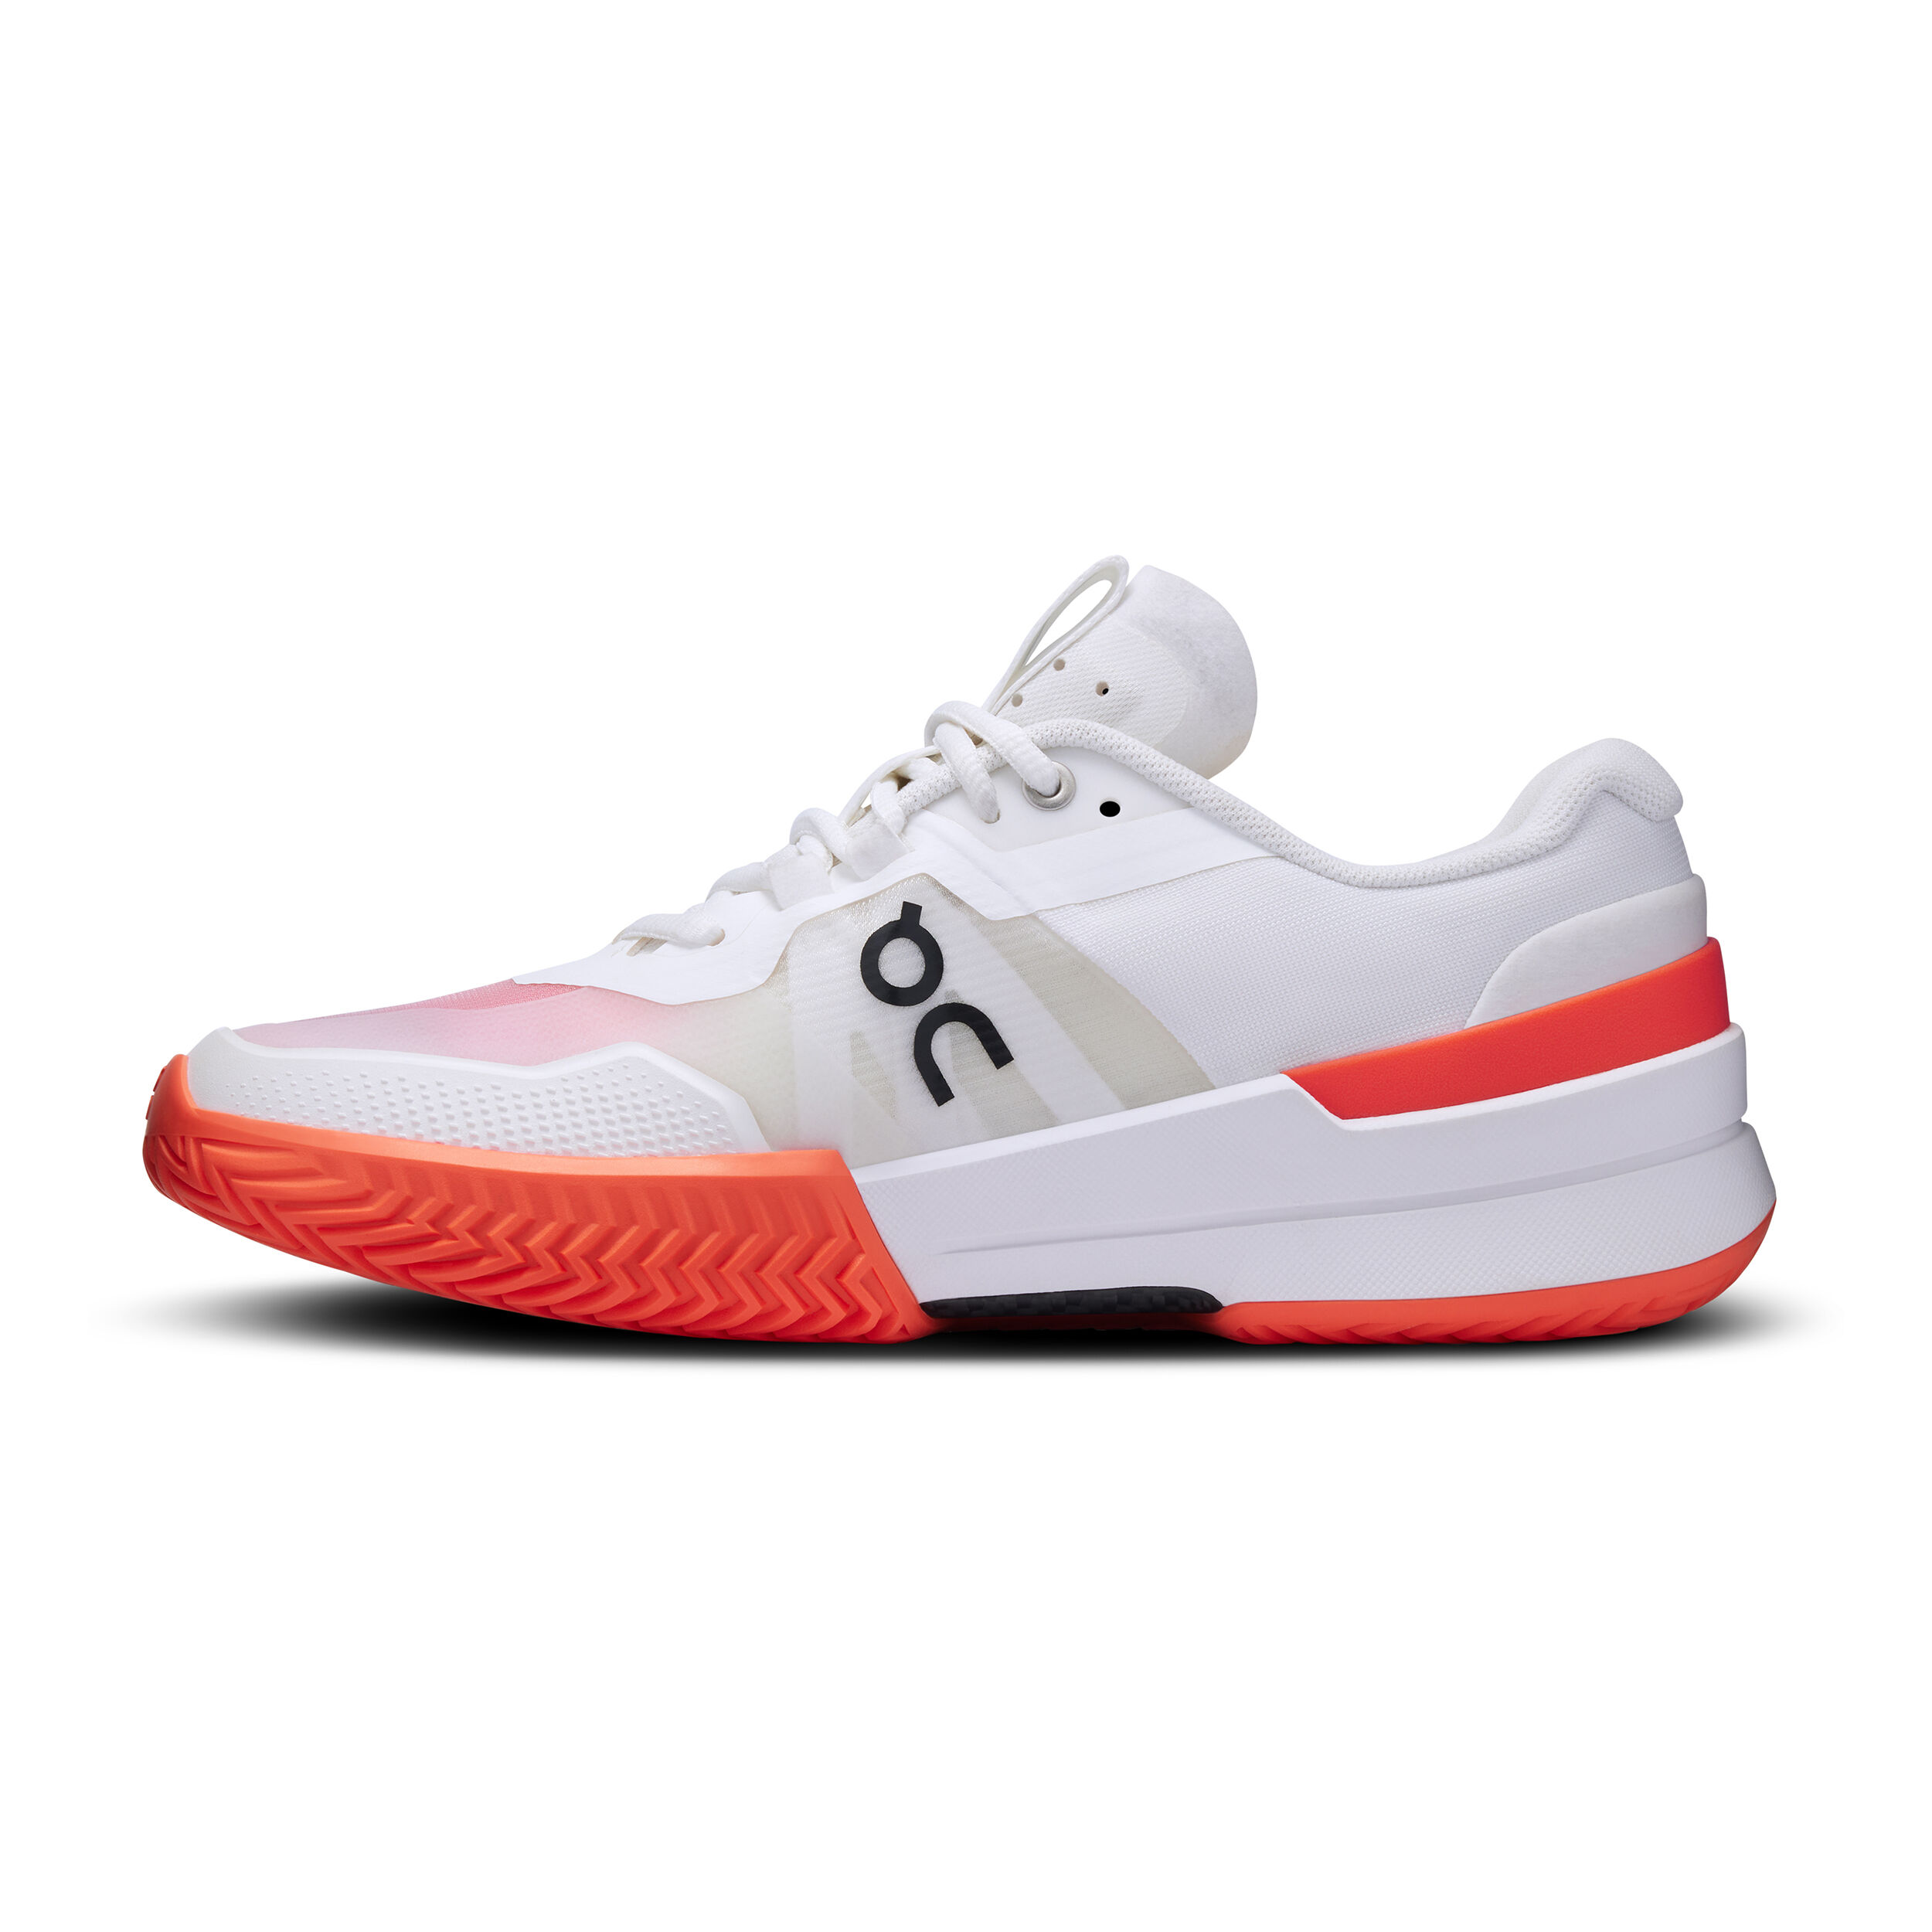 The Roger Pro 2 Women - White, Coral